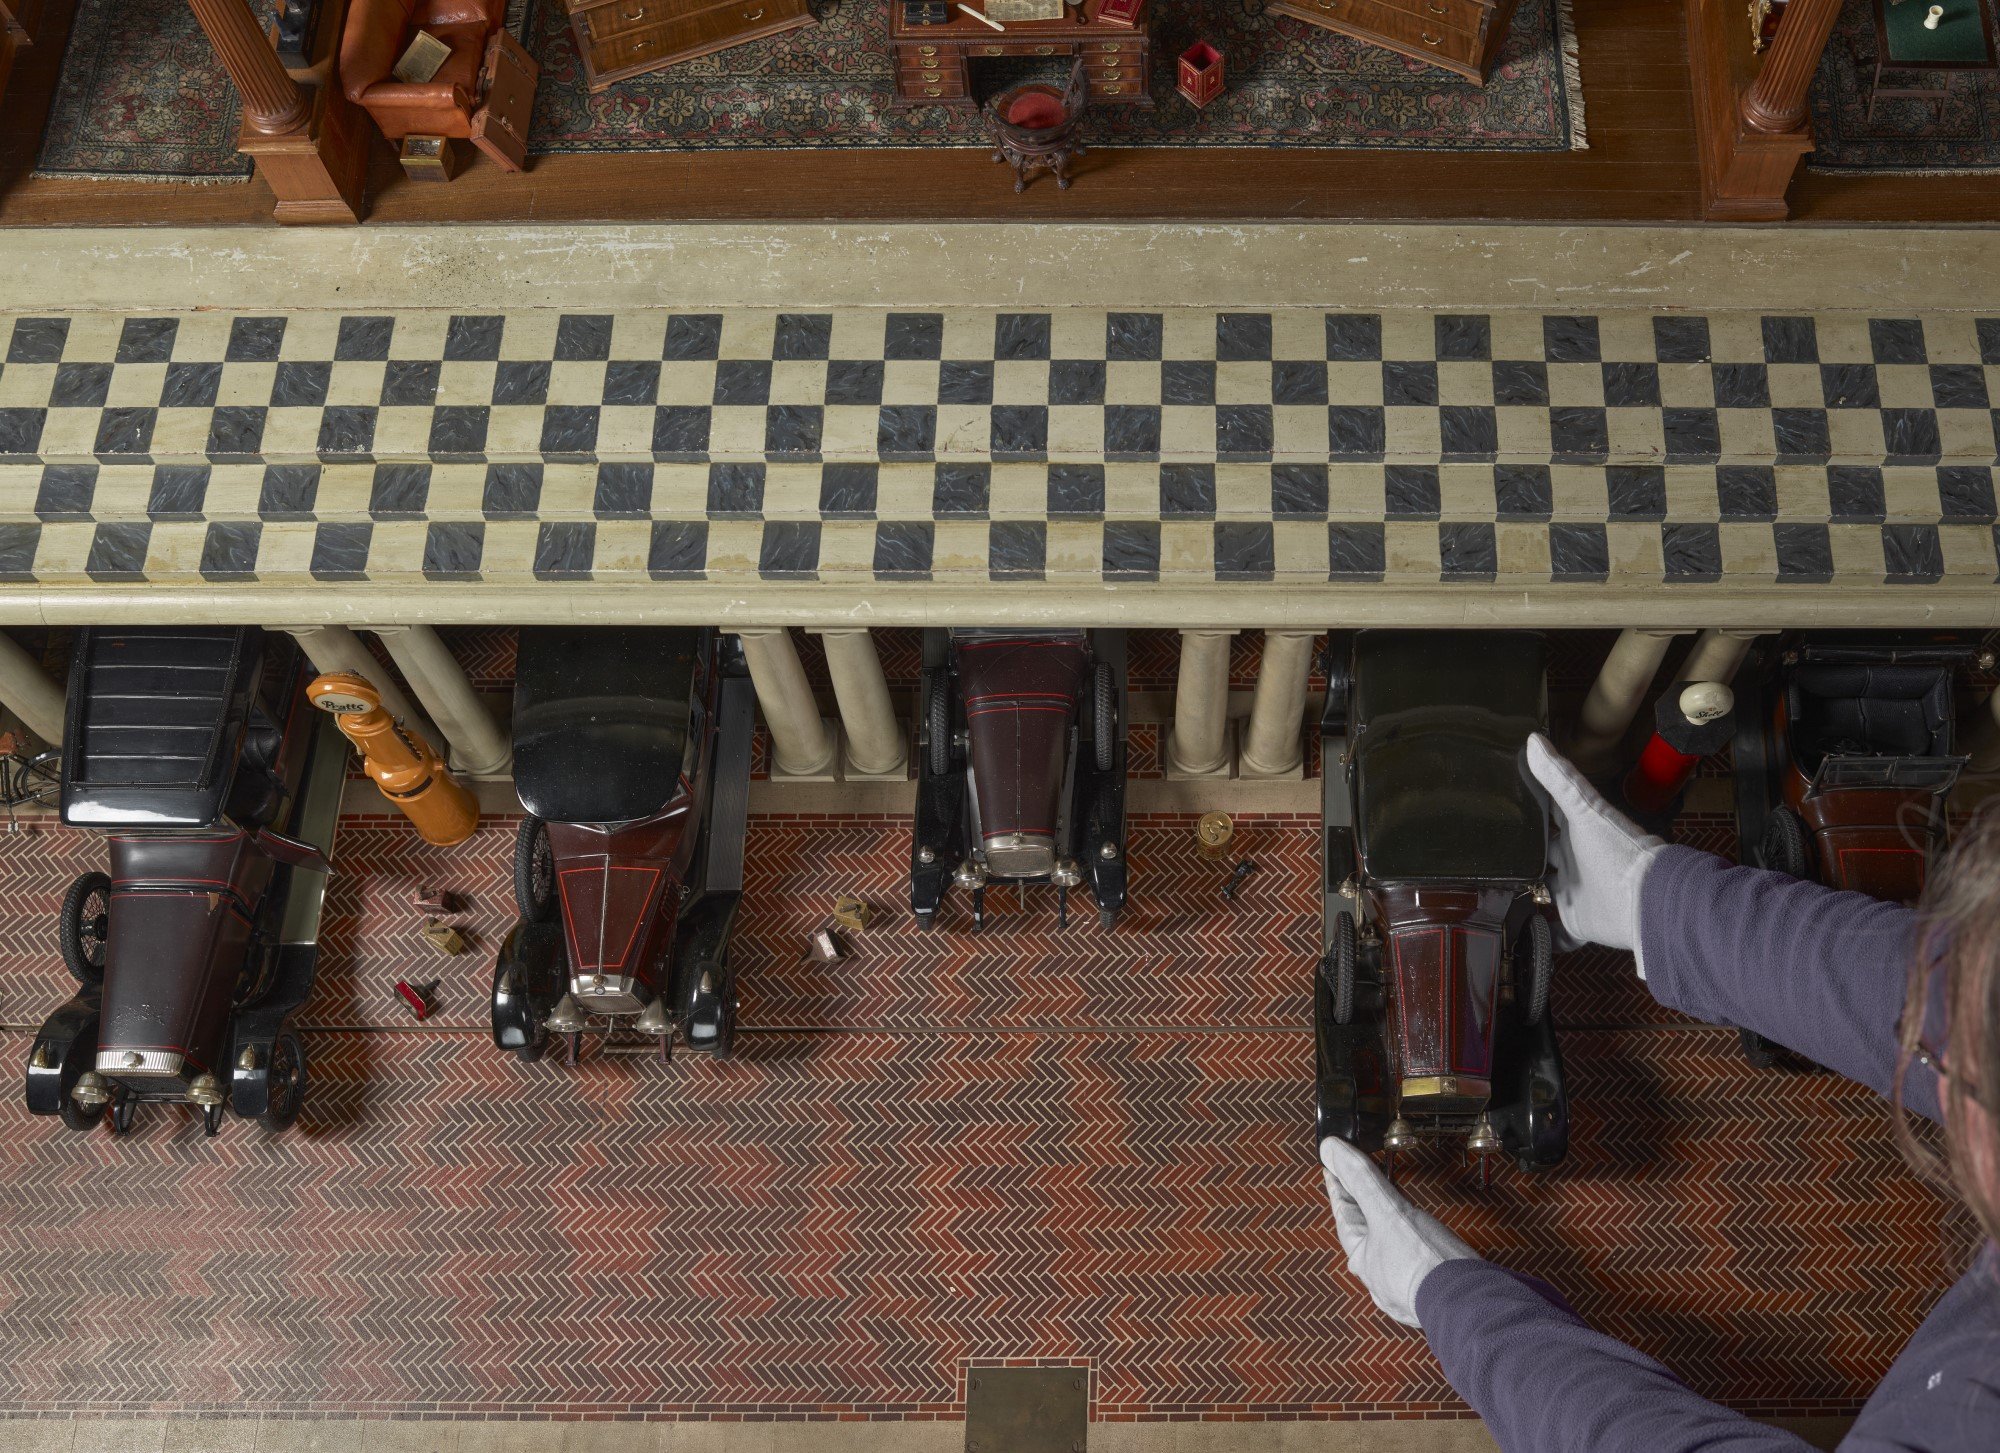 Looking down at the miniature cars in the garage of the Dolls' House